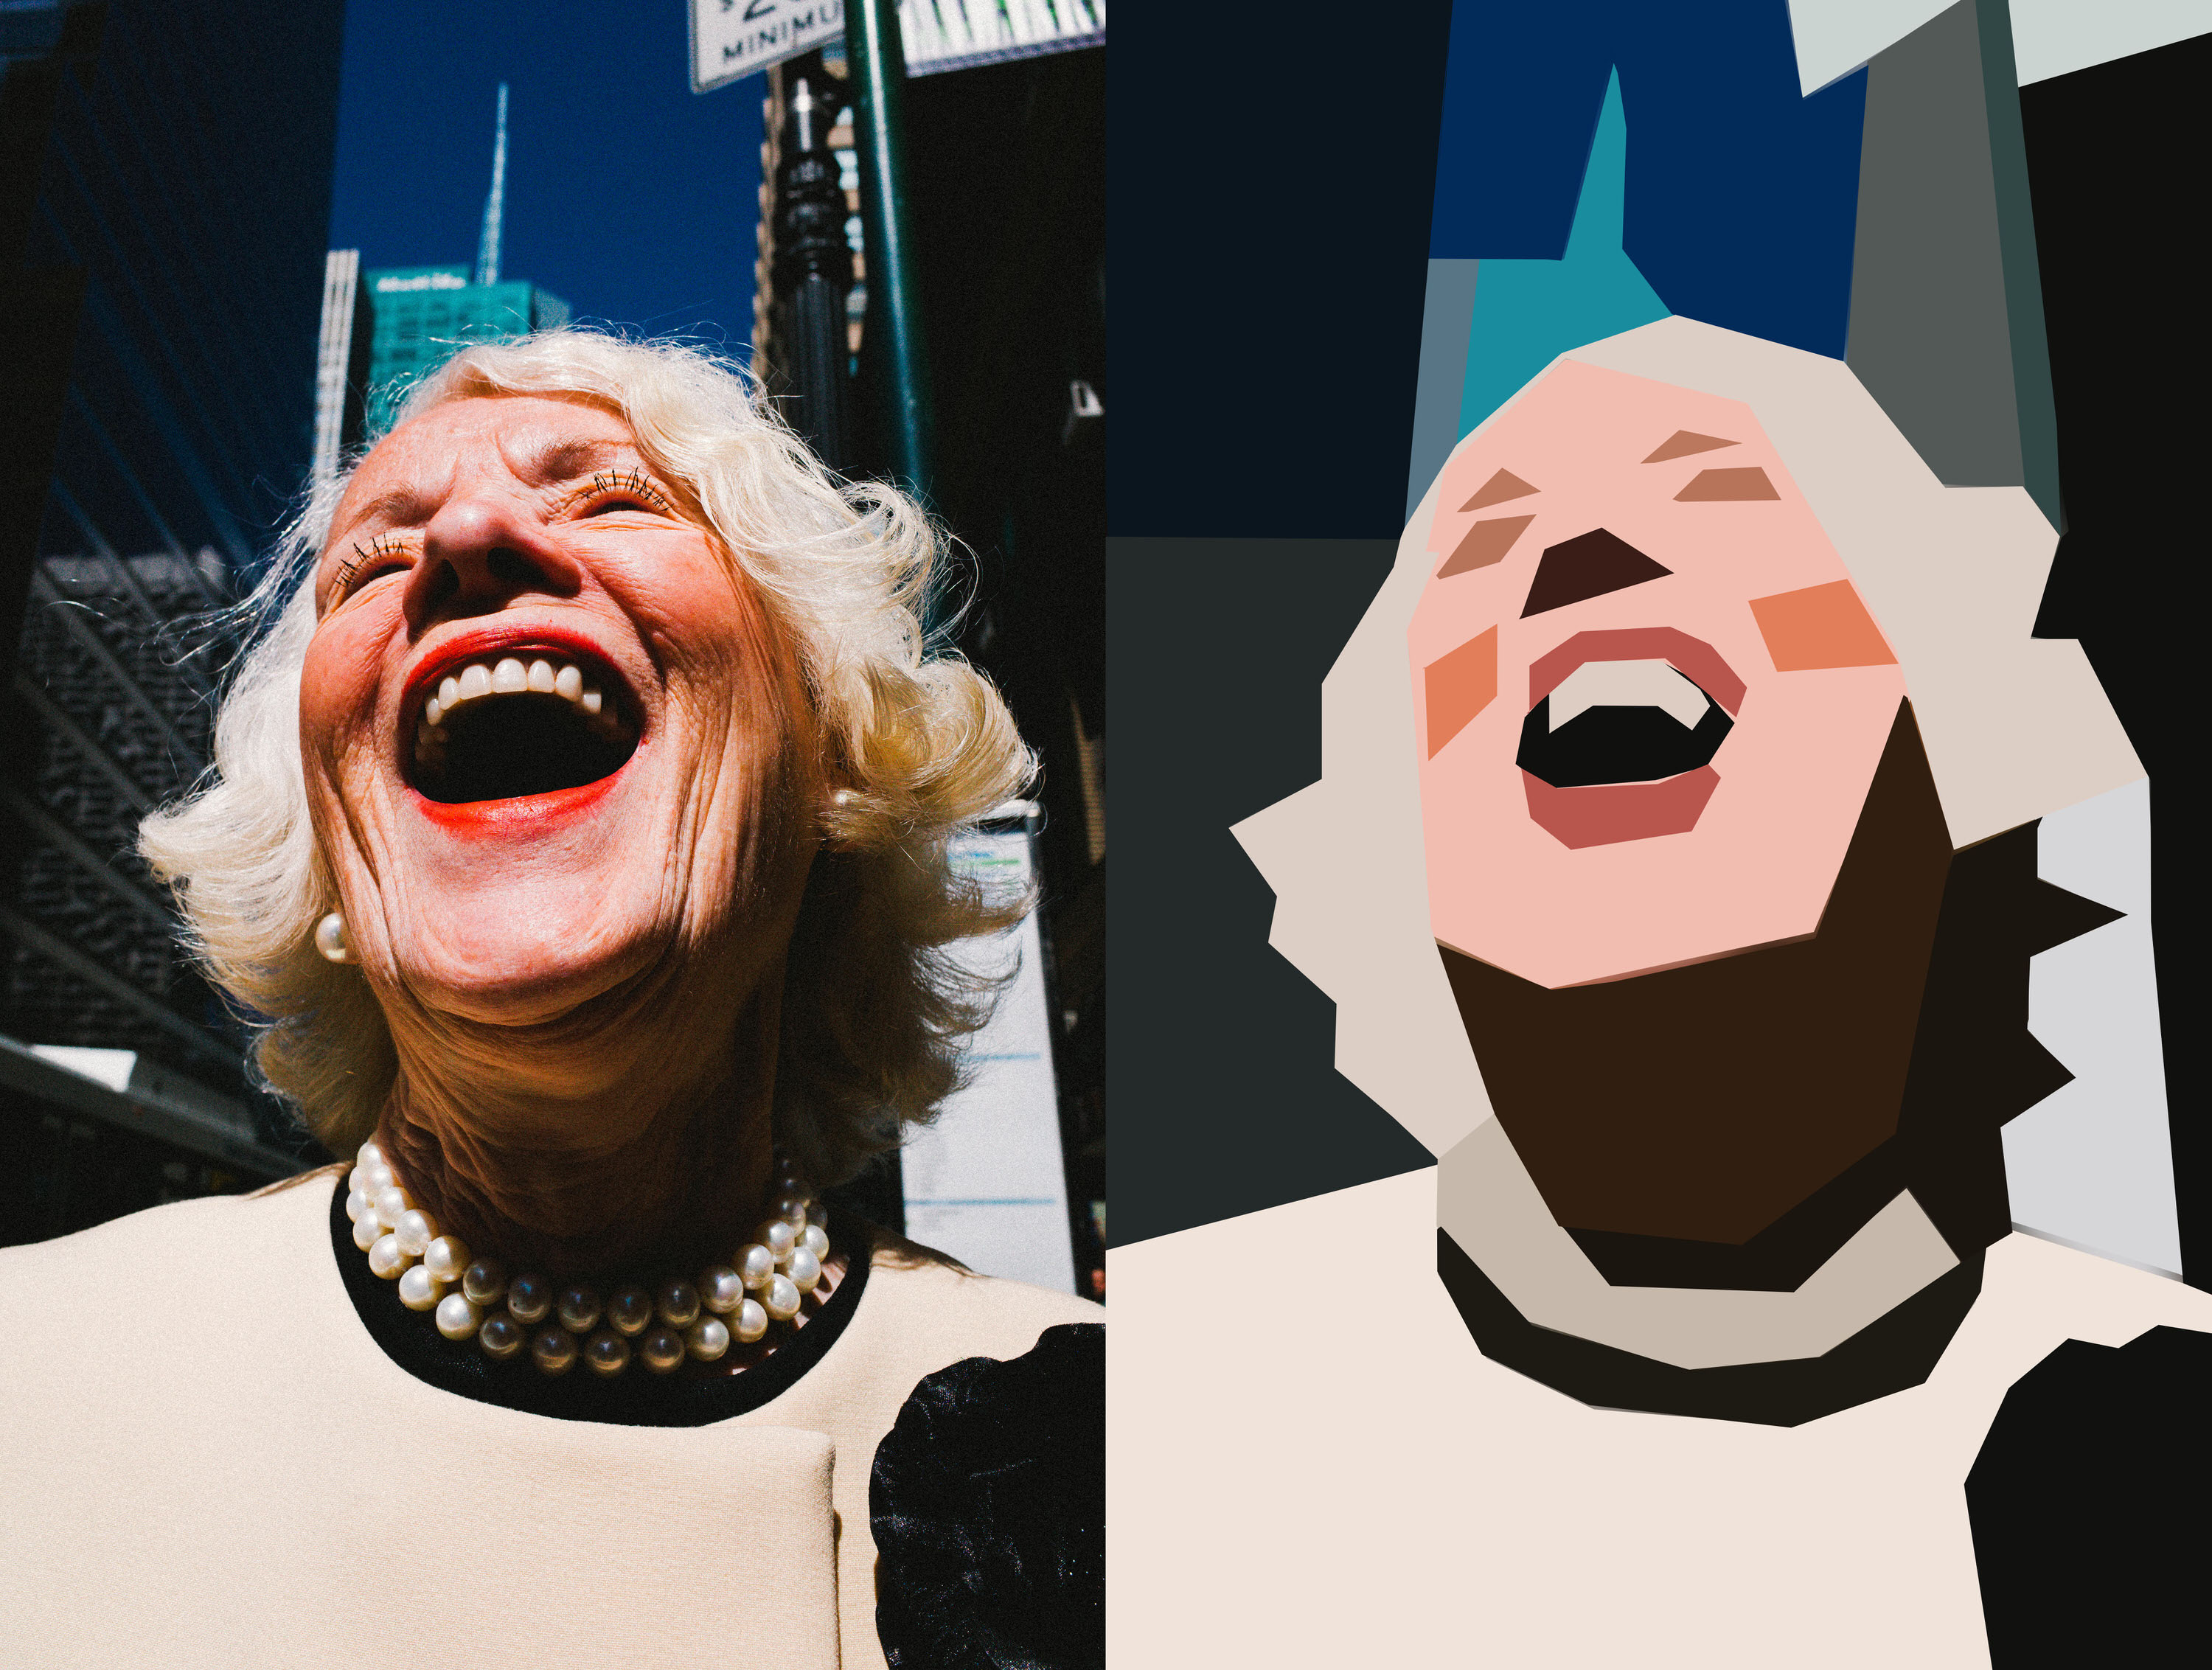 eric kim cubism - side by side laughing lady nyc